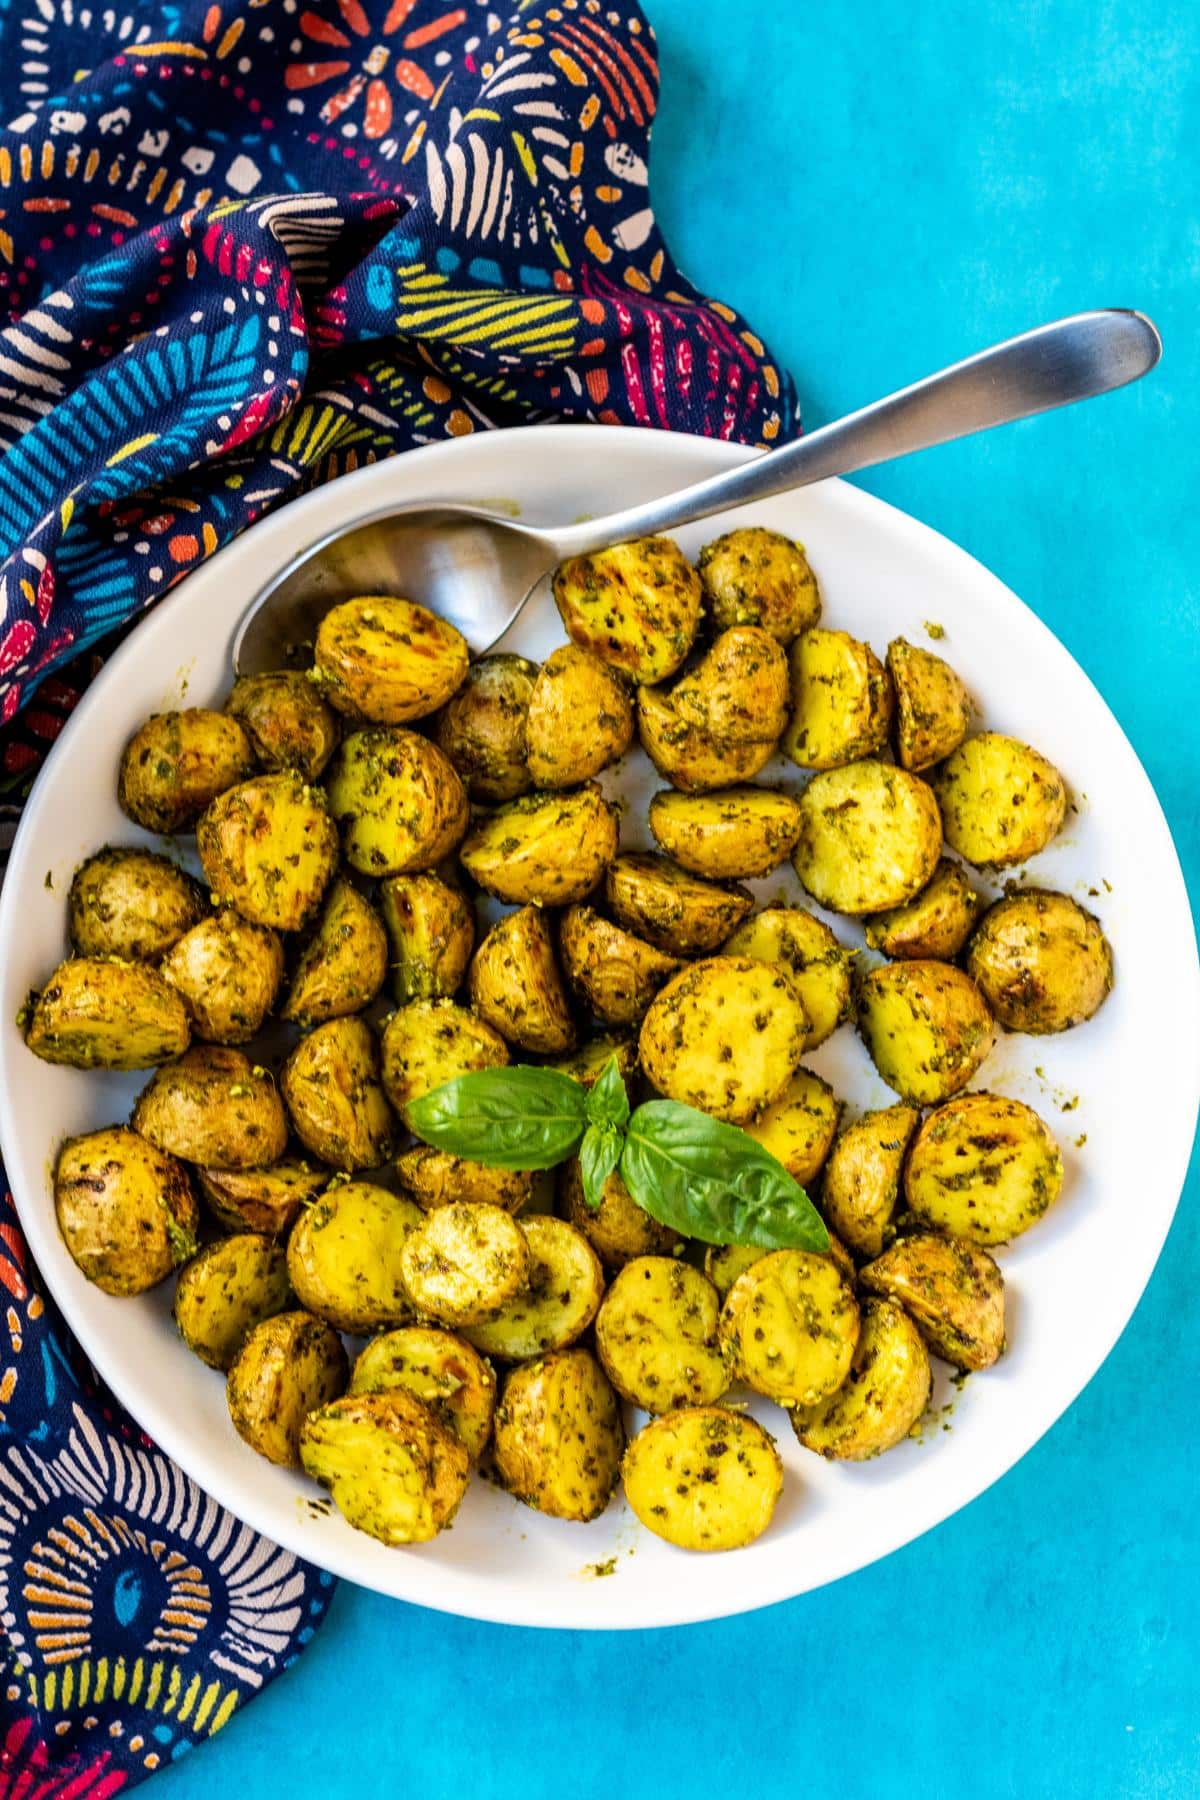 Serving bowl of Vegan Pesto Potatoes with a colorful napkin.